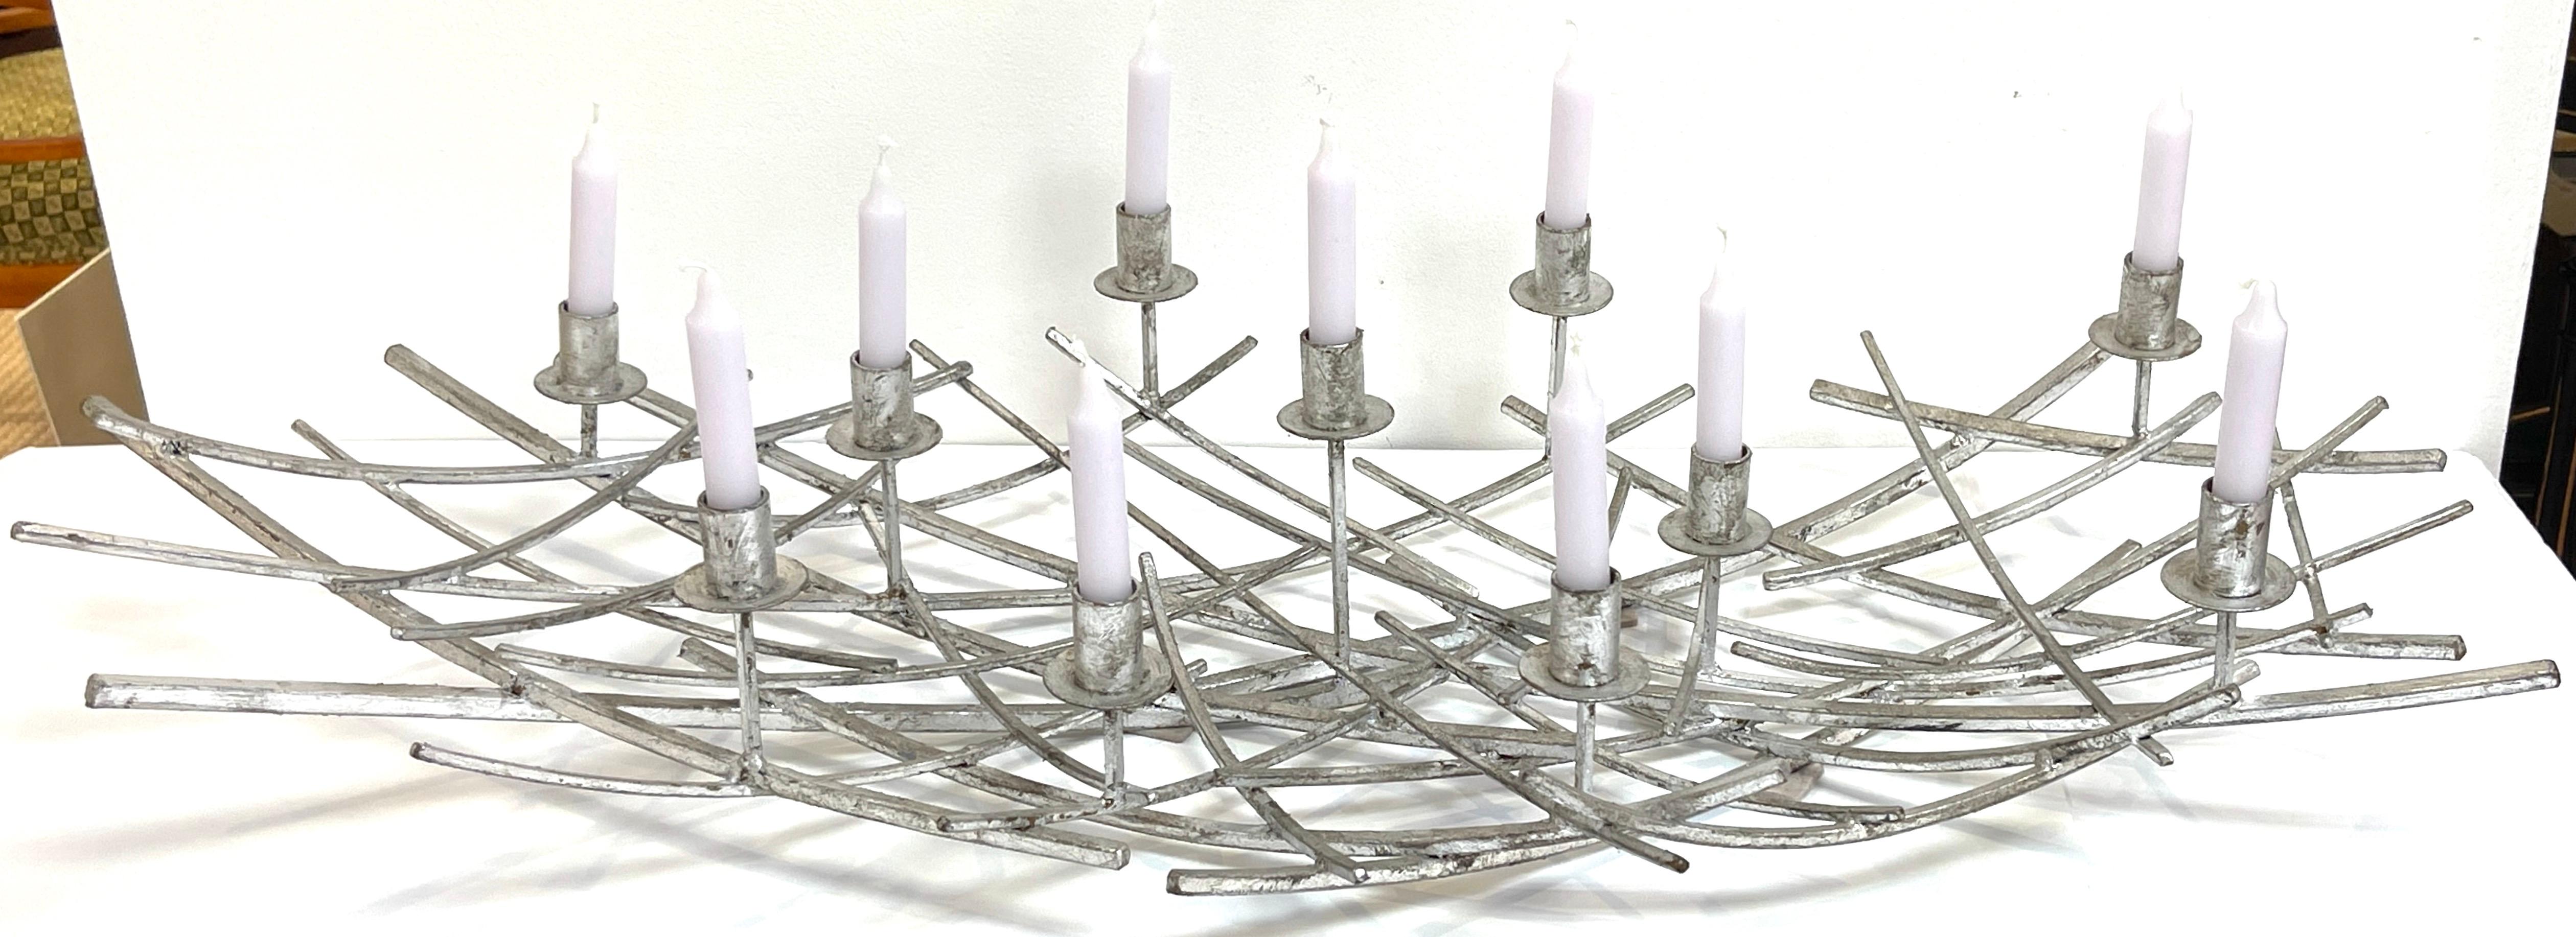 12 Light French Modern Kinetic Silvered Metal Candelabra Centerpiece  
France, Circa 1980s

A unique 12-Light French Modern Kinetic Silvered Metal Candelabra Centerpiece, made in France, originating in the 1980s. This remarkable piece boasts a